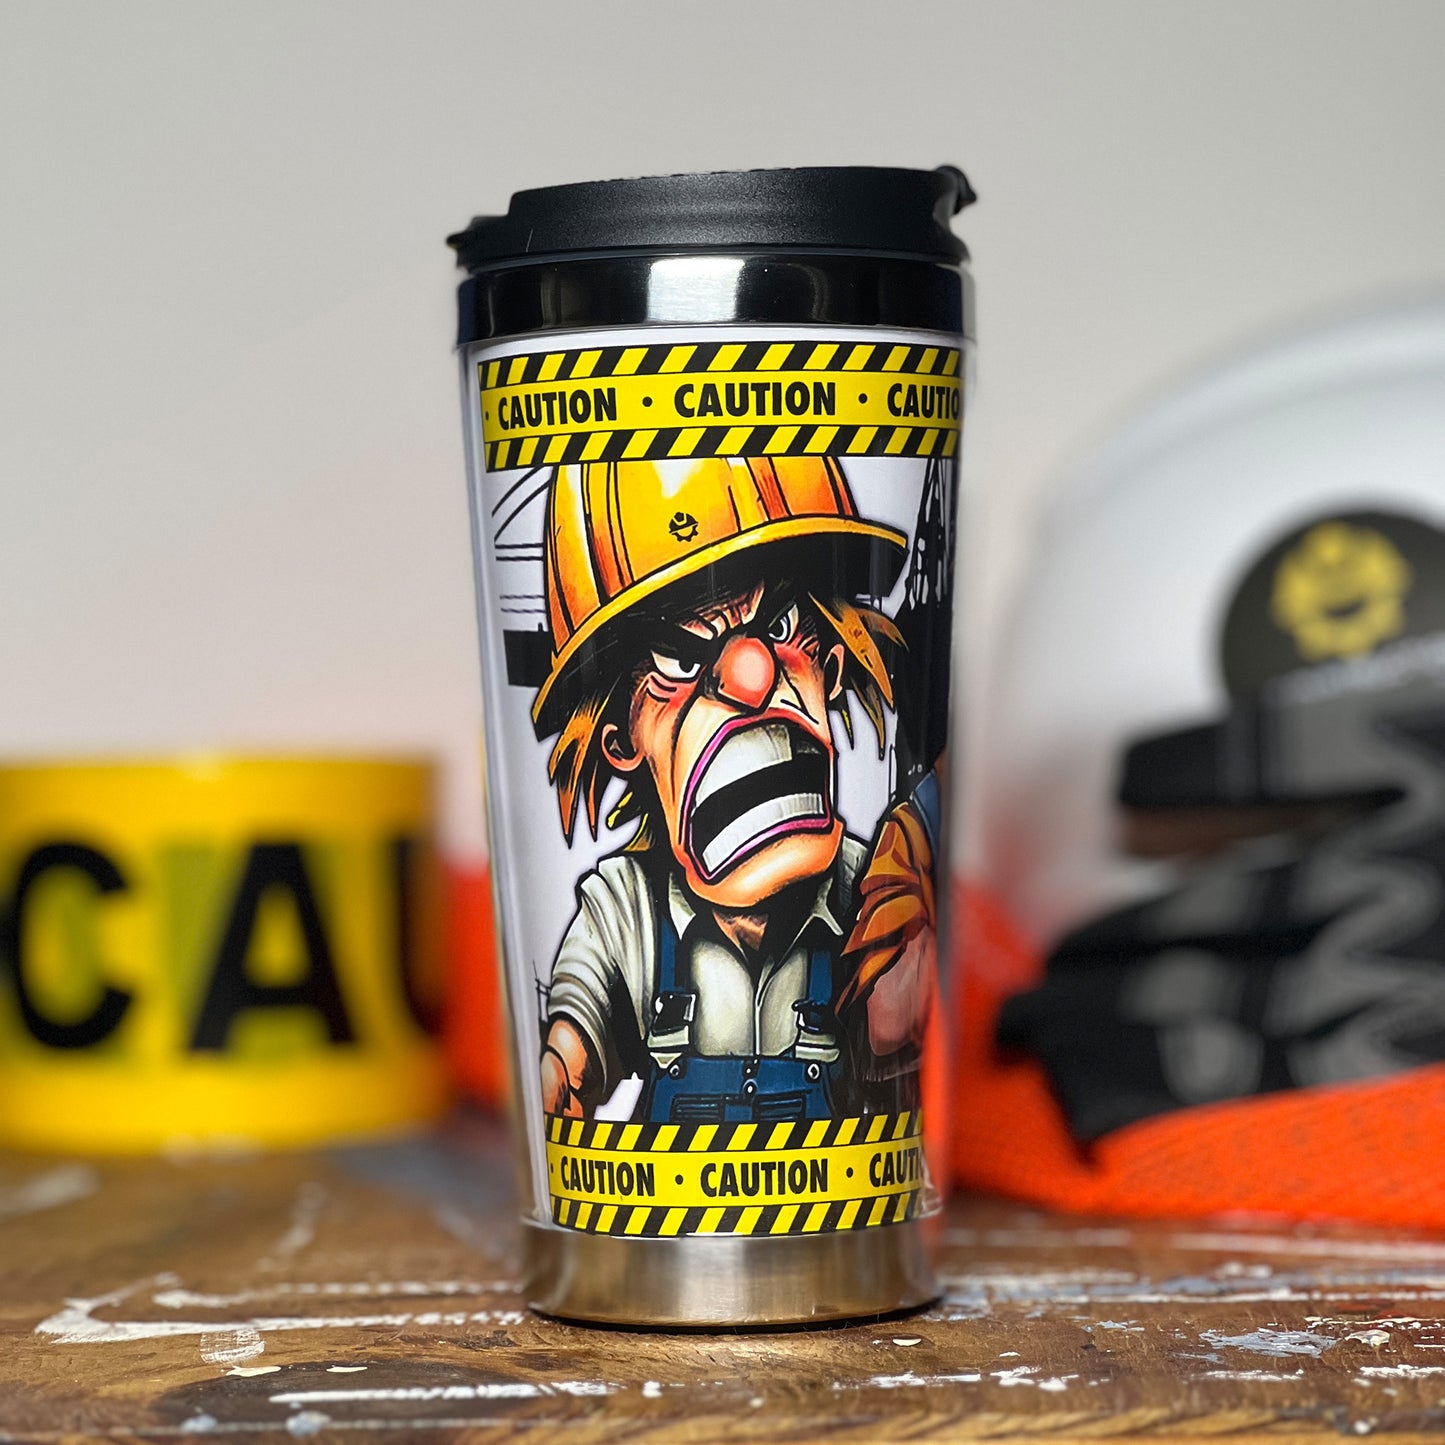 Construction Grind's "Meet the Crew" Second Shift 12 oz. coffee tumbler. Showing a close-up of our Site Superintendent, "Jack", one of three crew members shown on the tumbler.